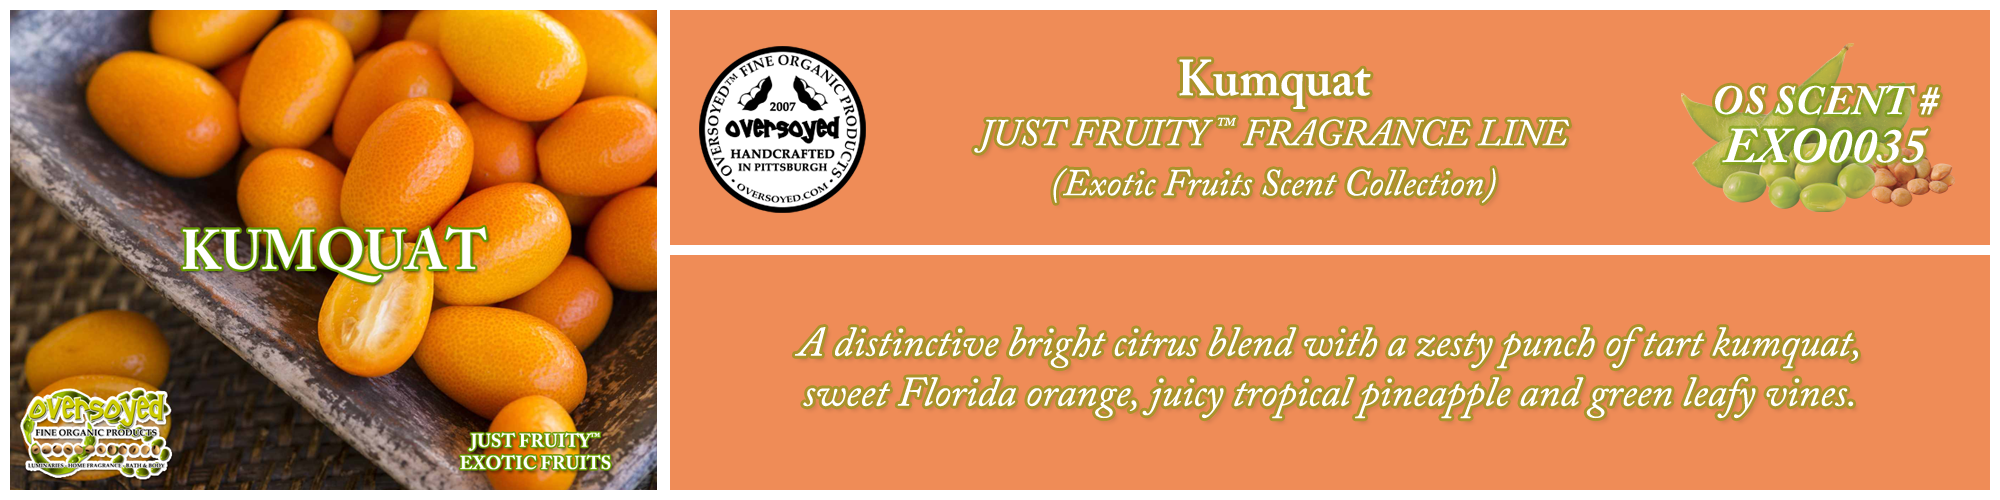 Kumquat Handcrafted Products Collection